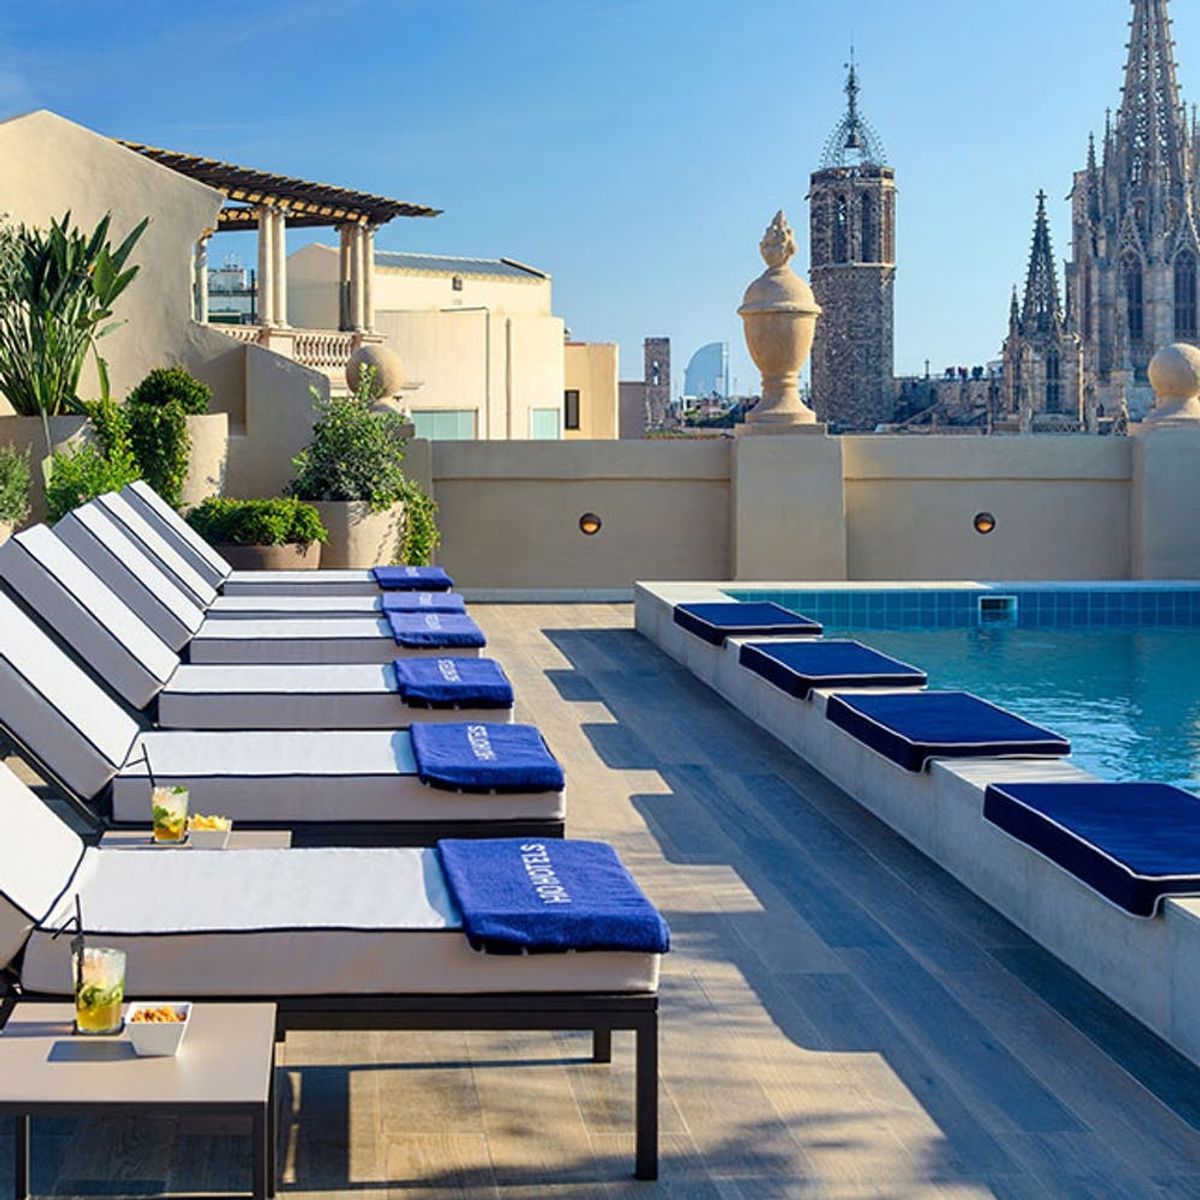 10 Epic Hotels to Book in Europe Before Summer Ends